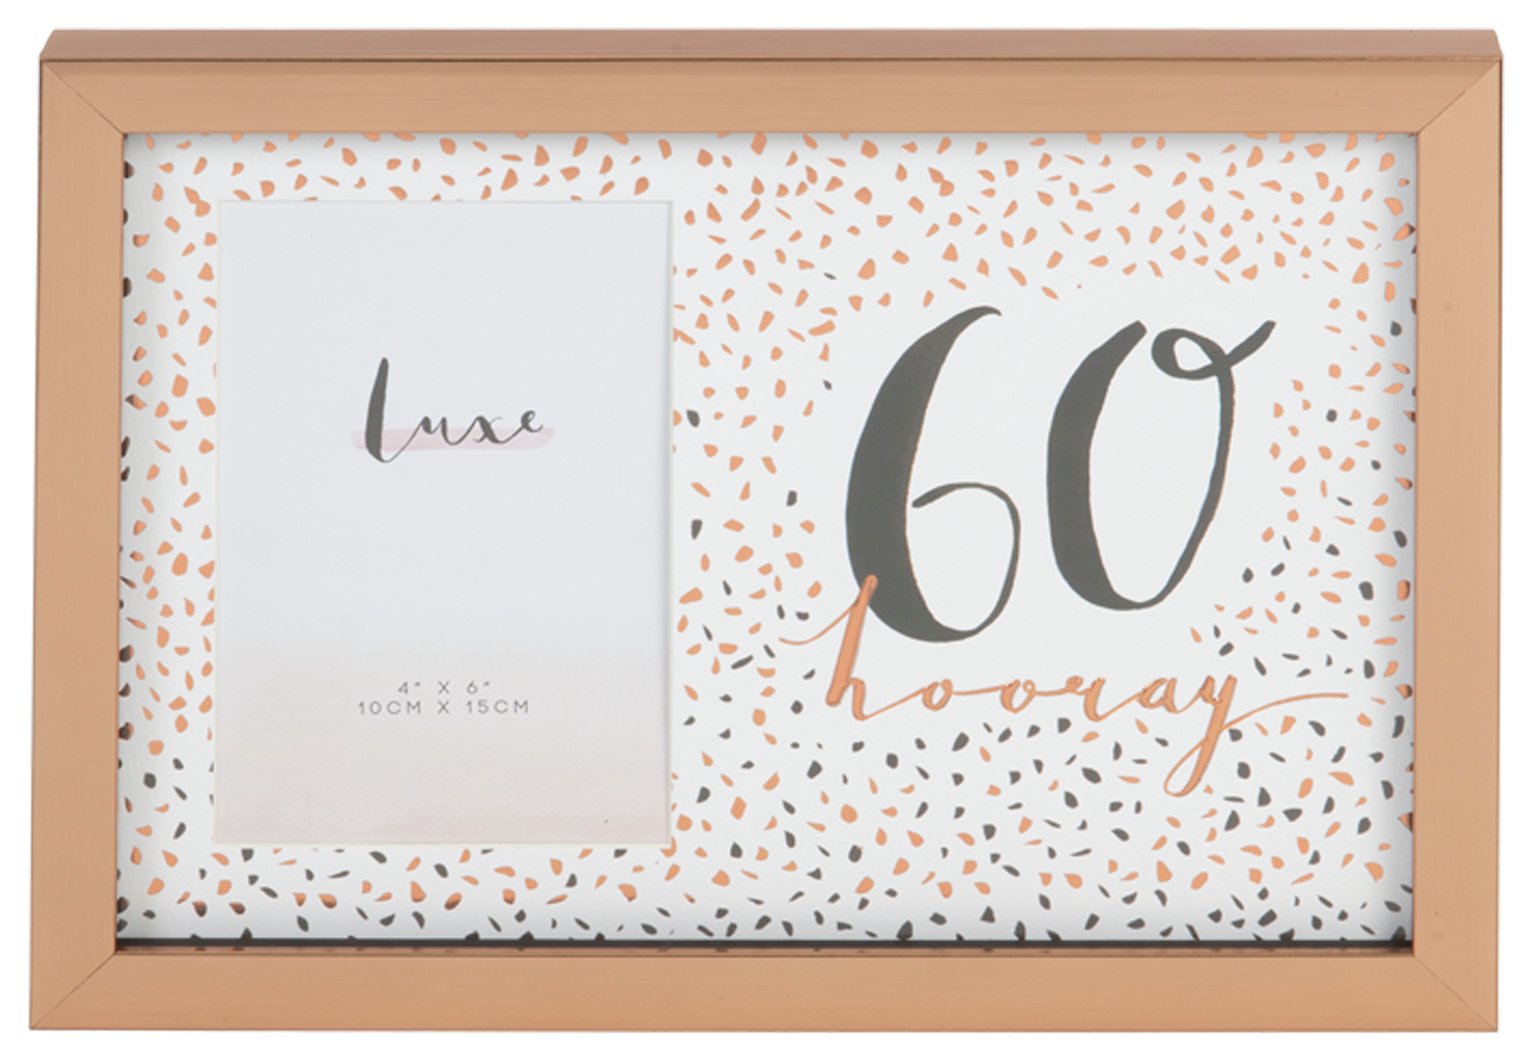 Hotchpotch Luxe 60th Birthday Photo Frame - Rose Gold